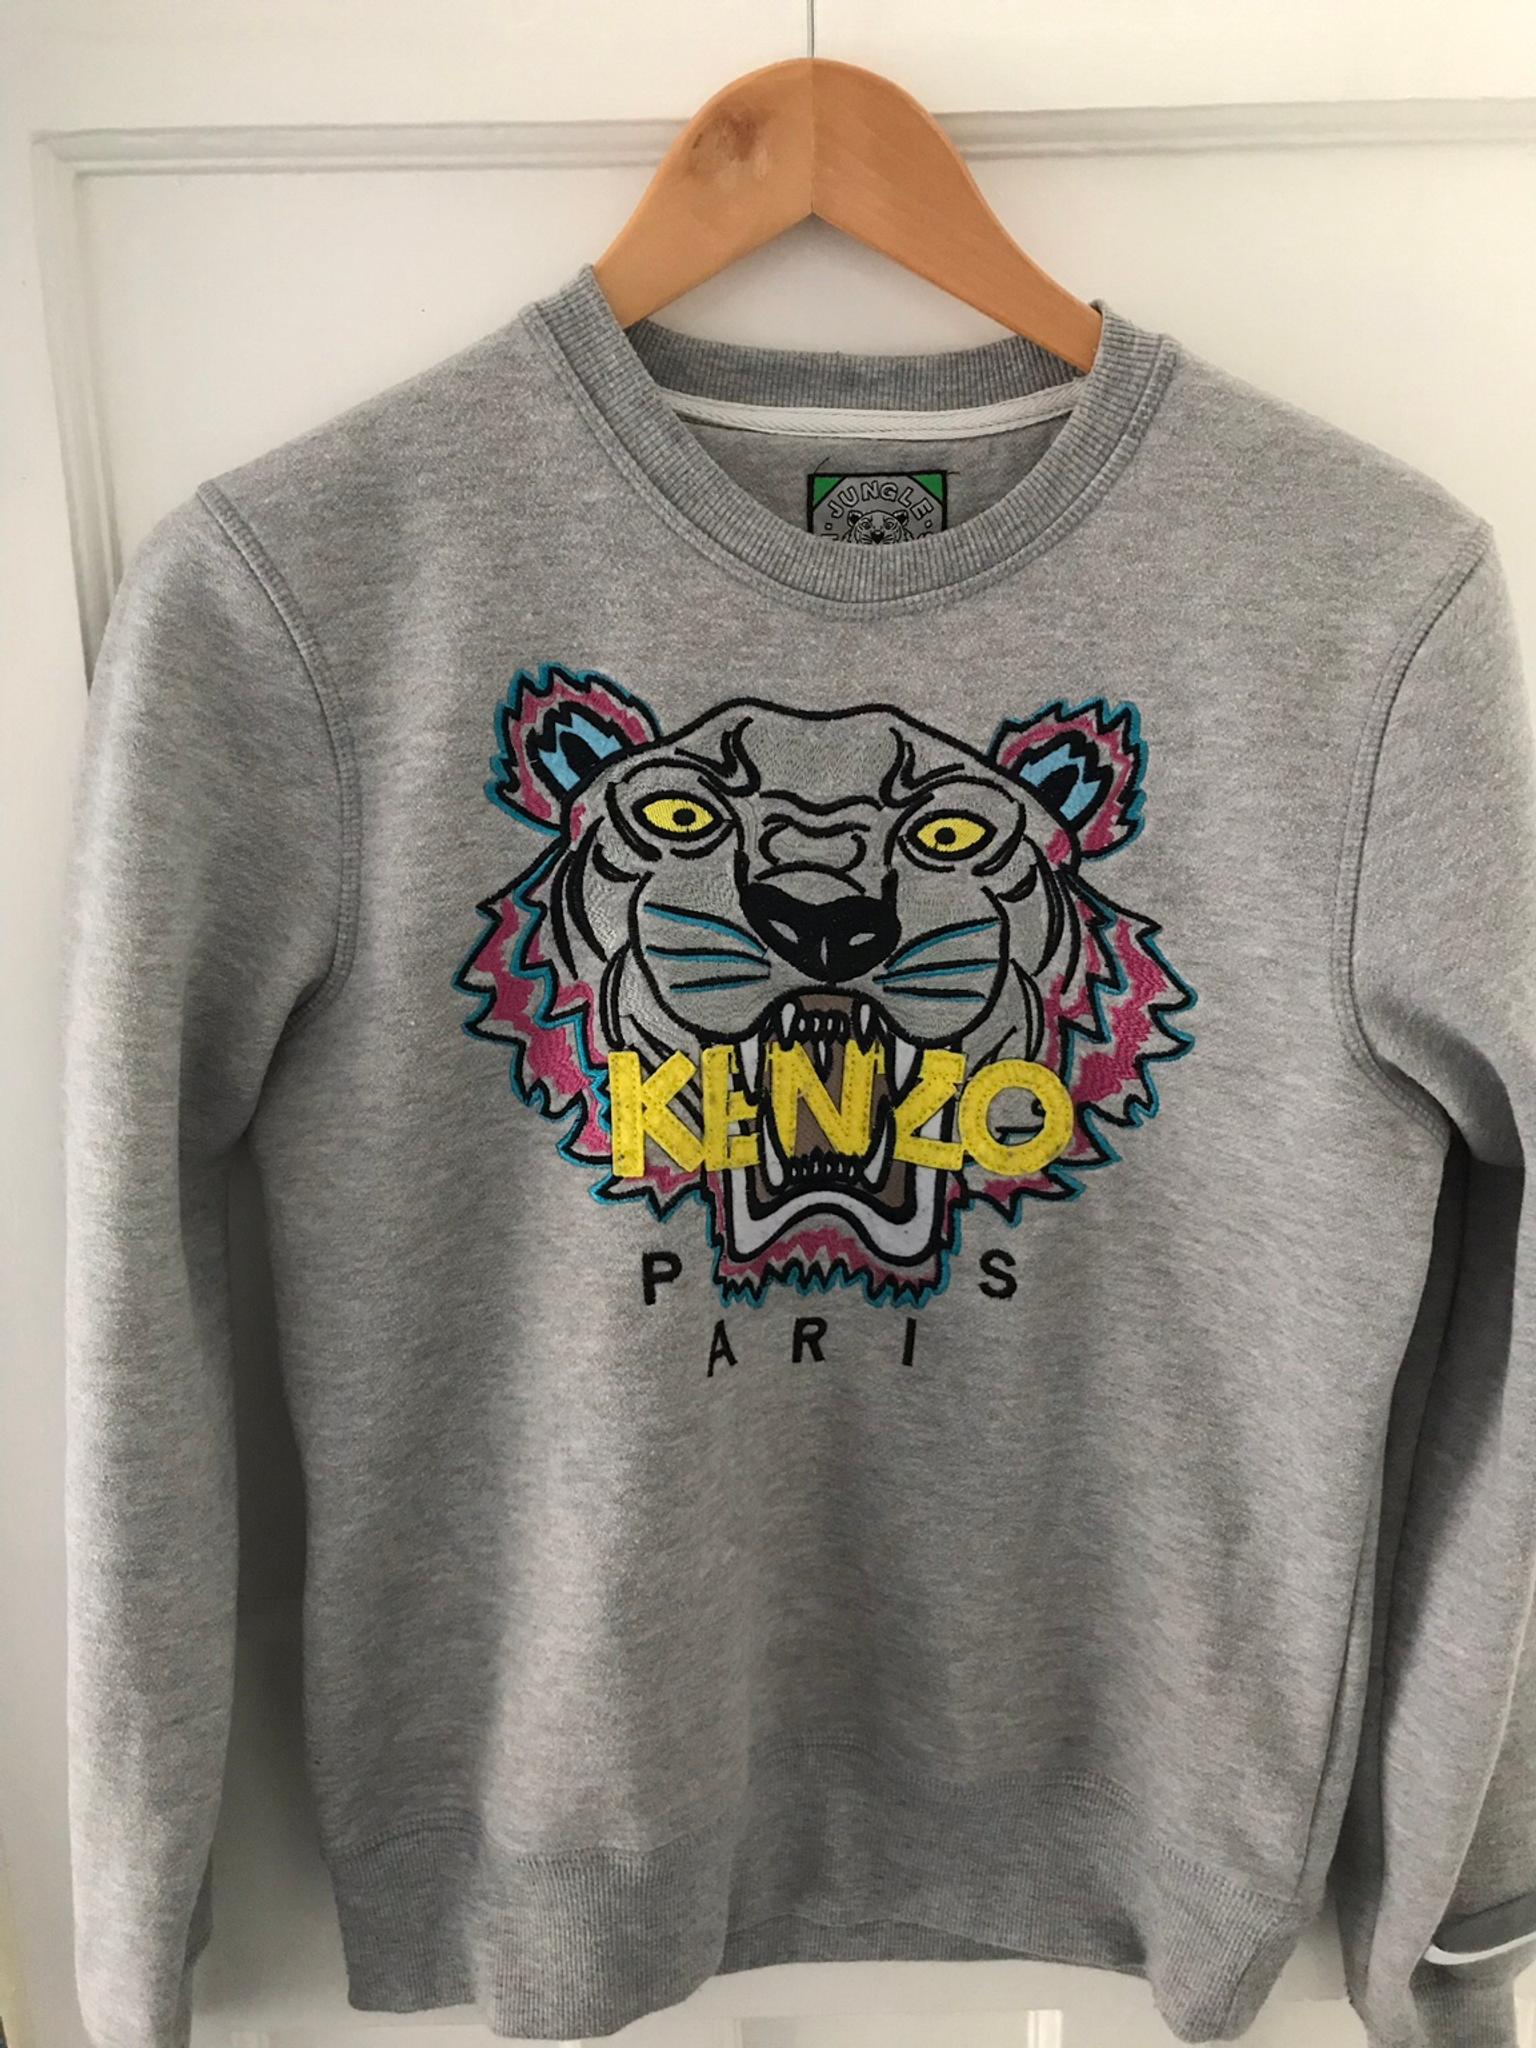 age 14 kenzo jumpers